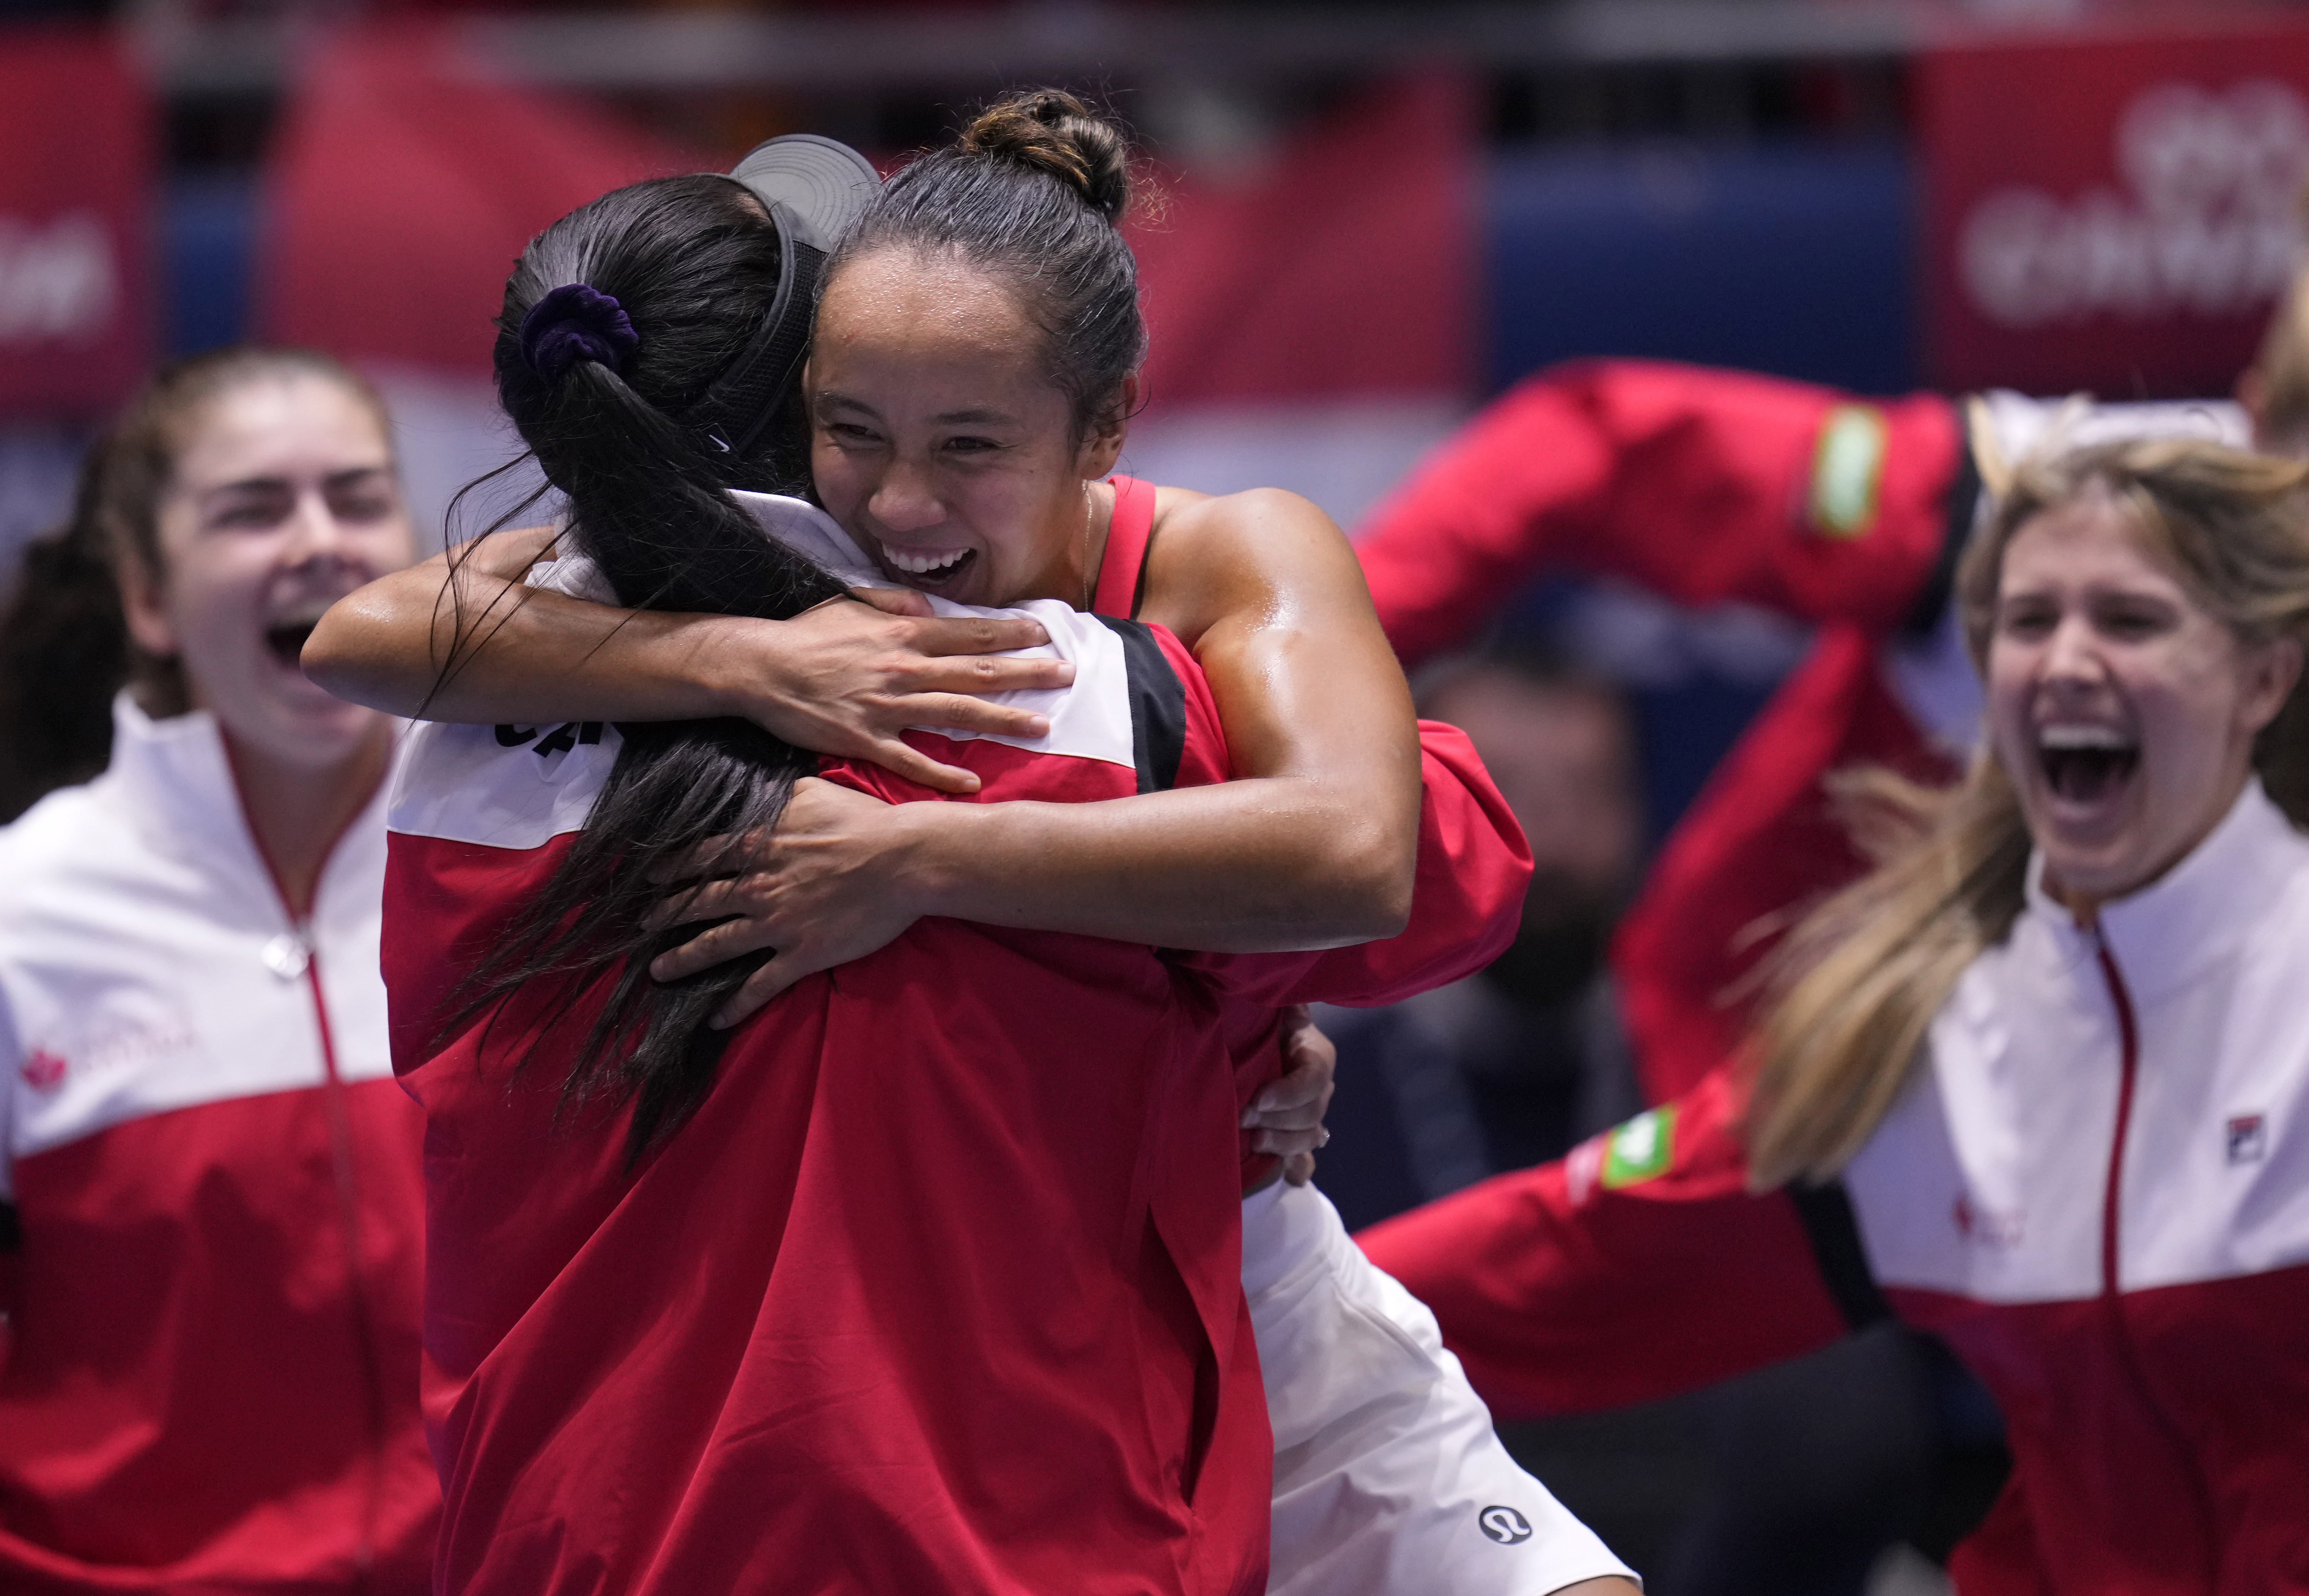 Leylah Fernandez clinches win as Canada tops Italy in Billie Jean King Cup  Finals - The Globe and Mail